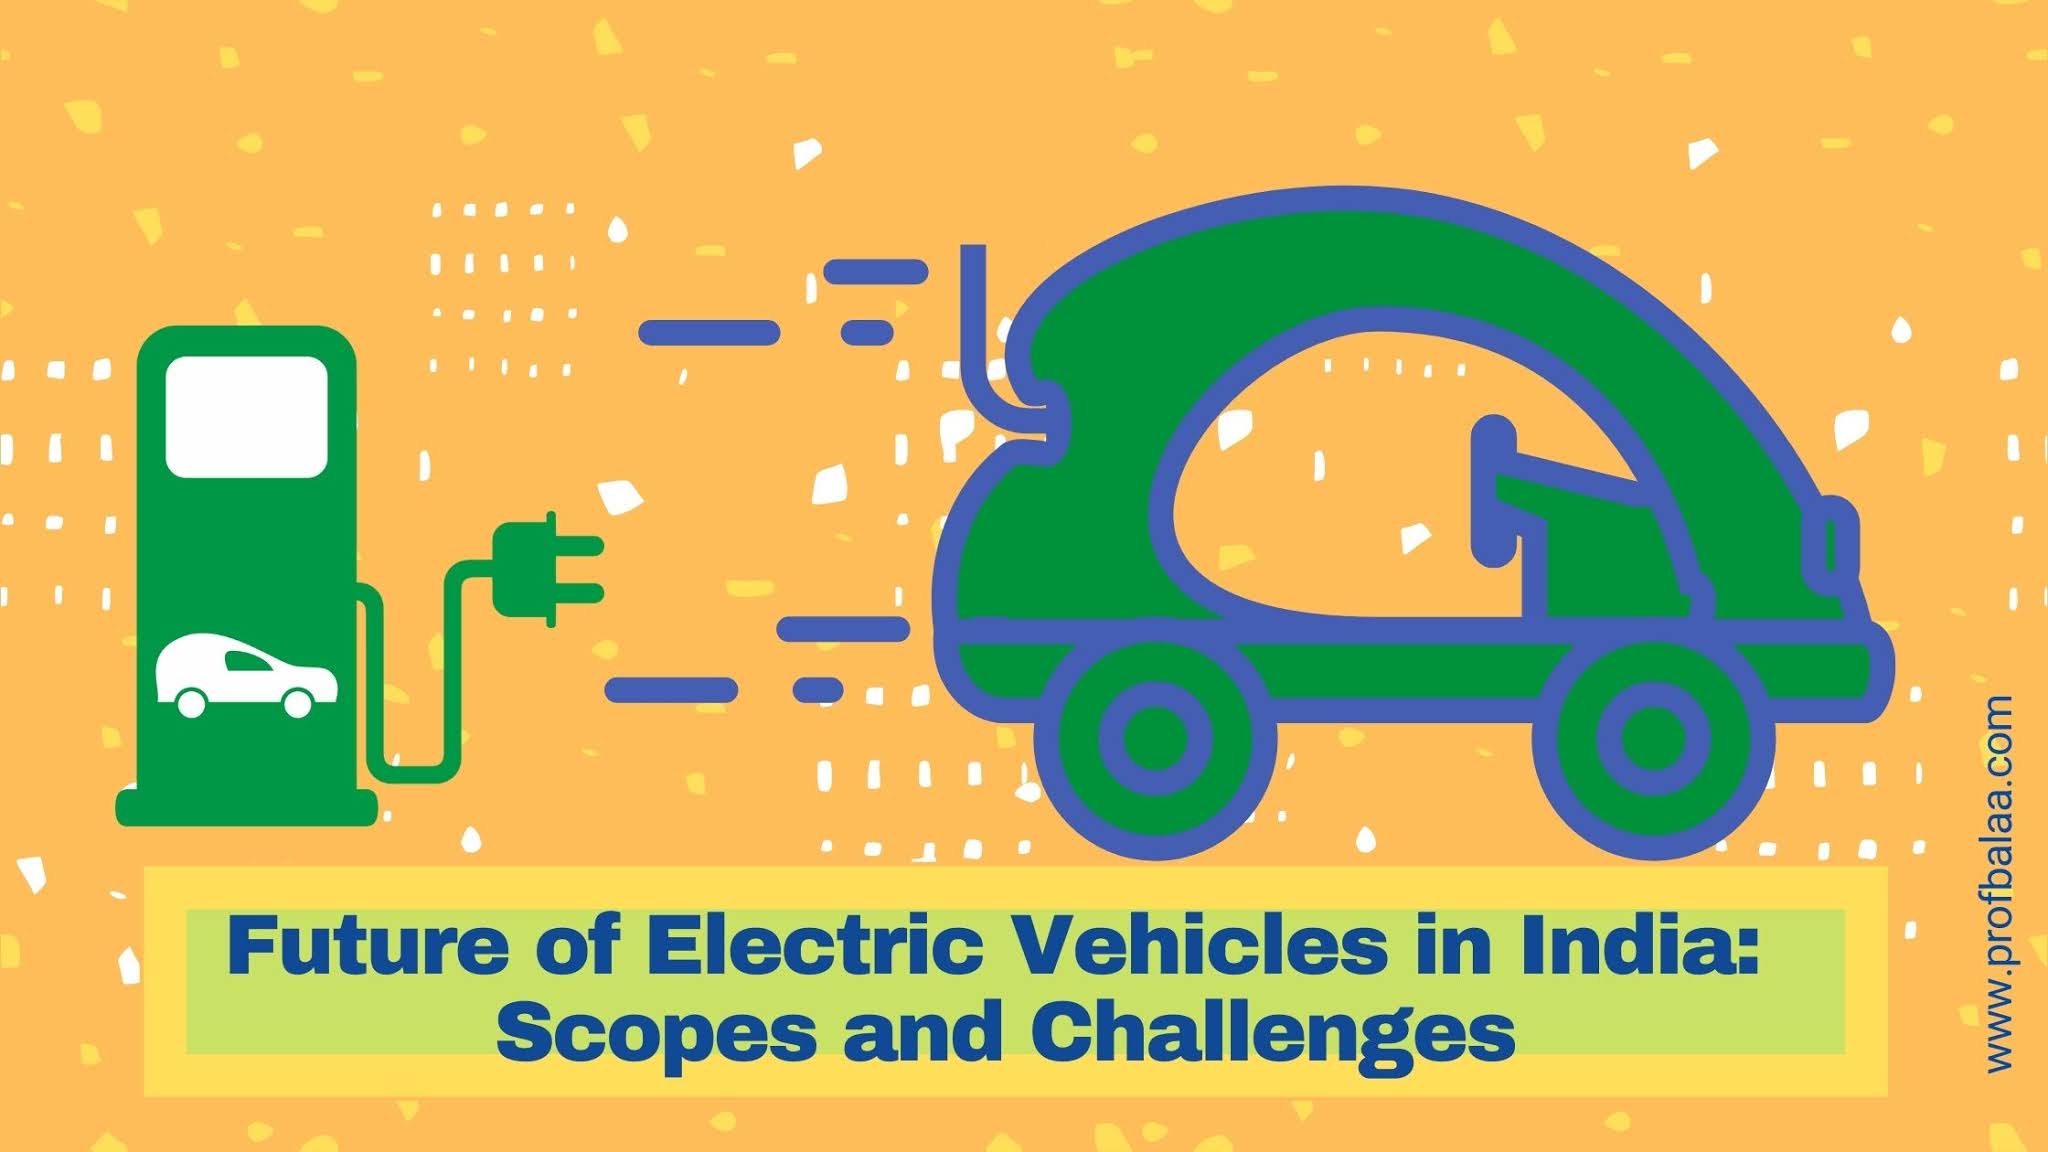 Future of Electric Vehicles in India Scopes and Challenges